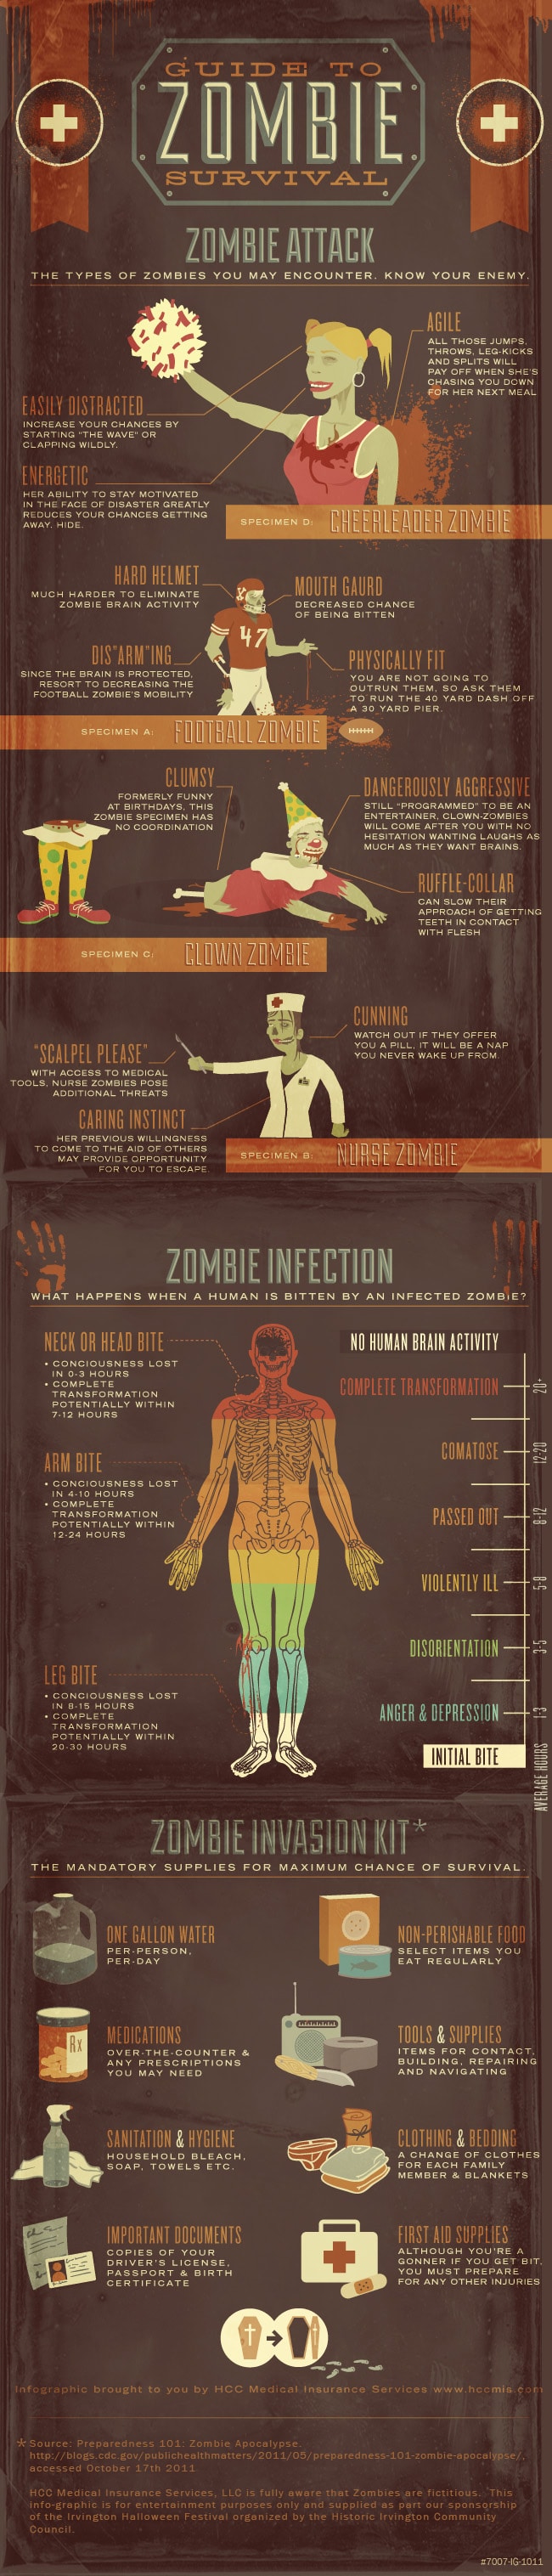 The Official Zombie Survival Guide [Infographic]